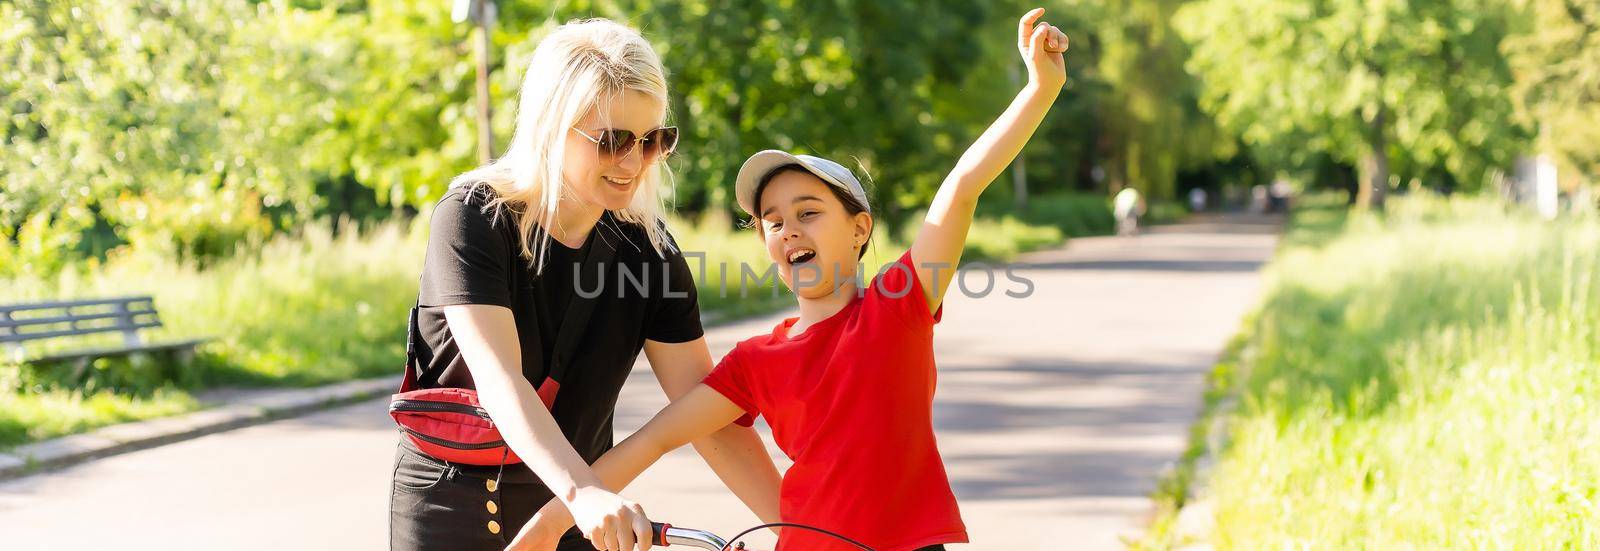 Beautiful and happy young mother teaching her daughter to ride a bicycle. Both smiling, summer park in background. by Andelov13